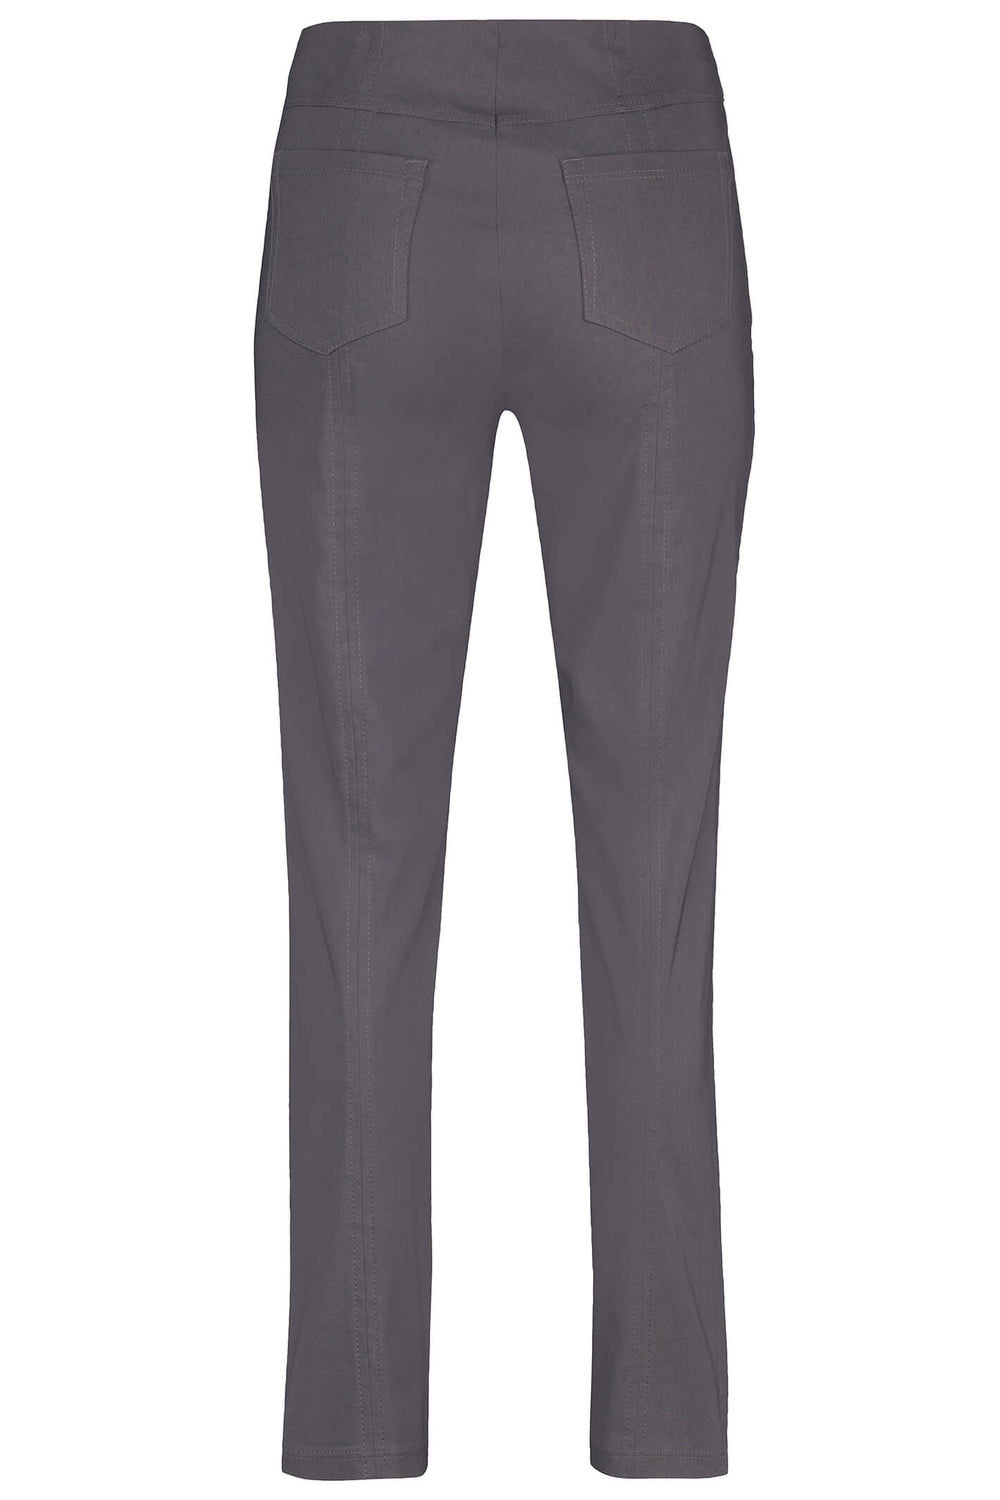 Robell 51559-5499-97 Bella Charcoal Grey Full Length Pull-On Trousers - Dotique